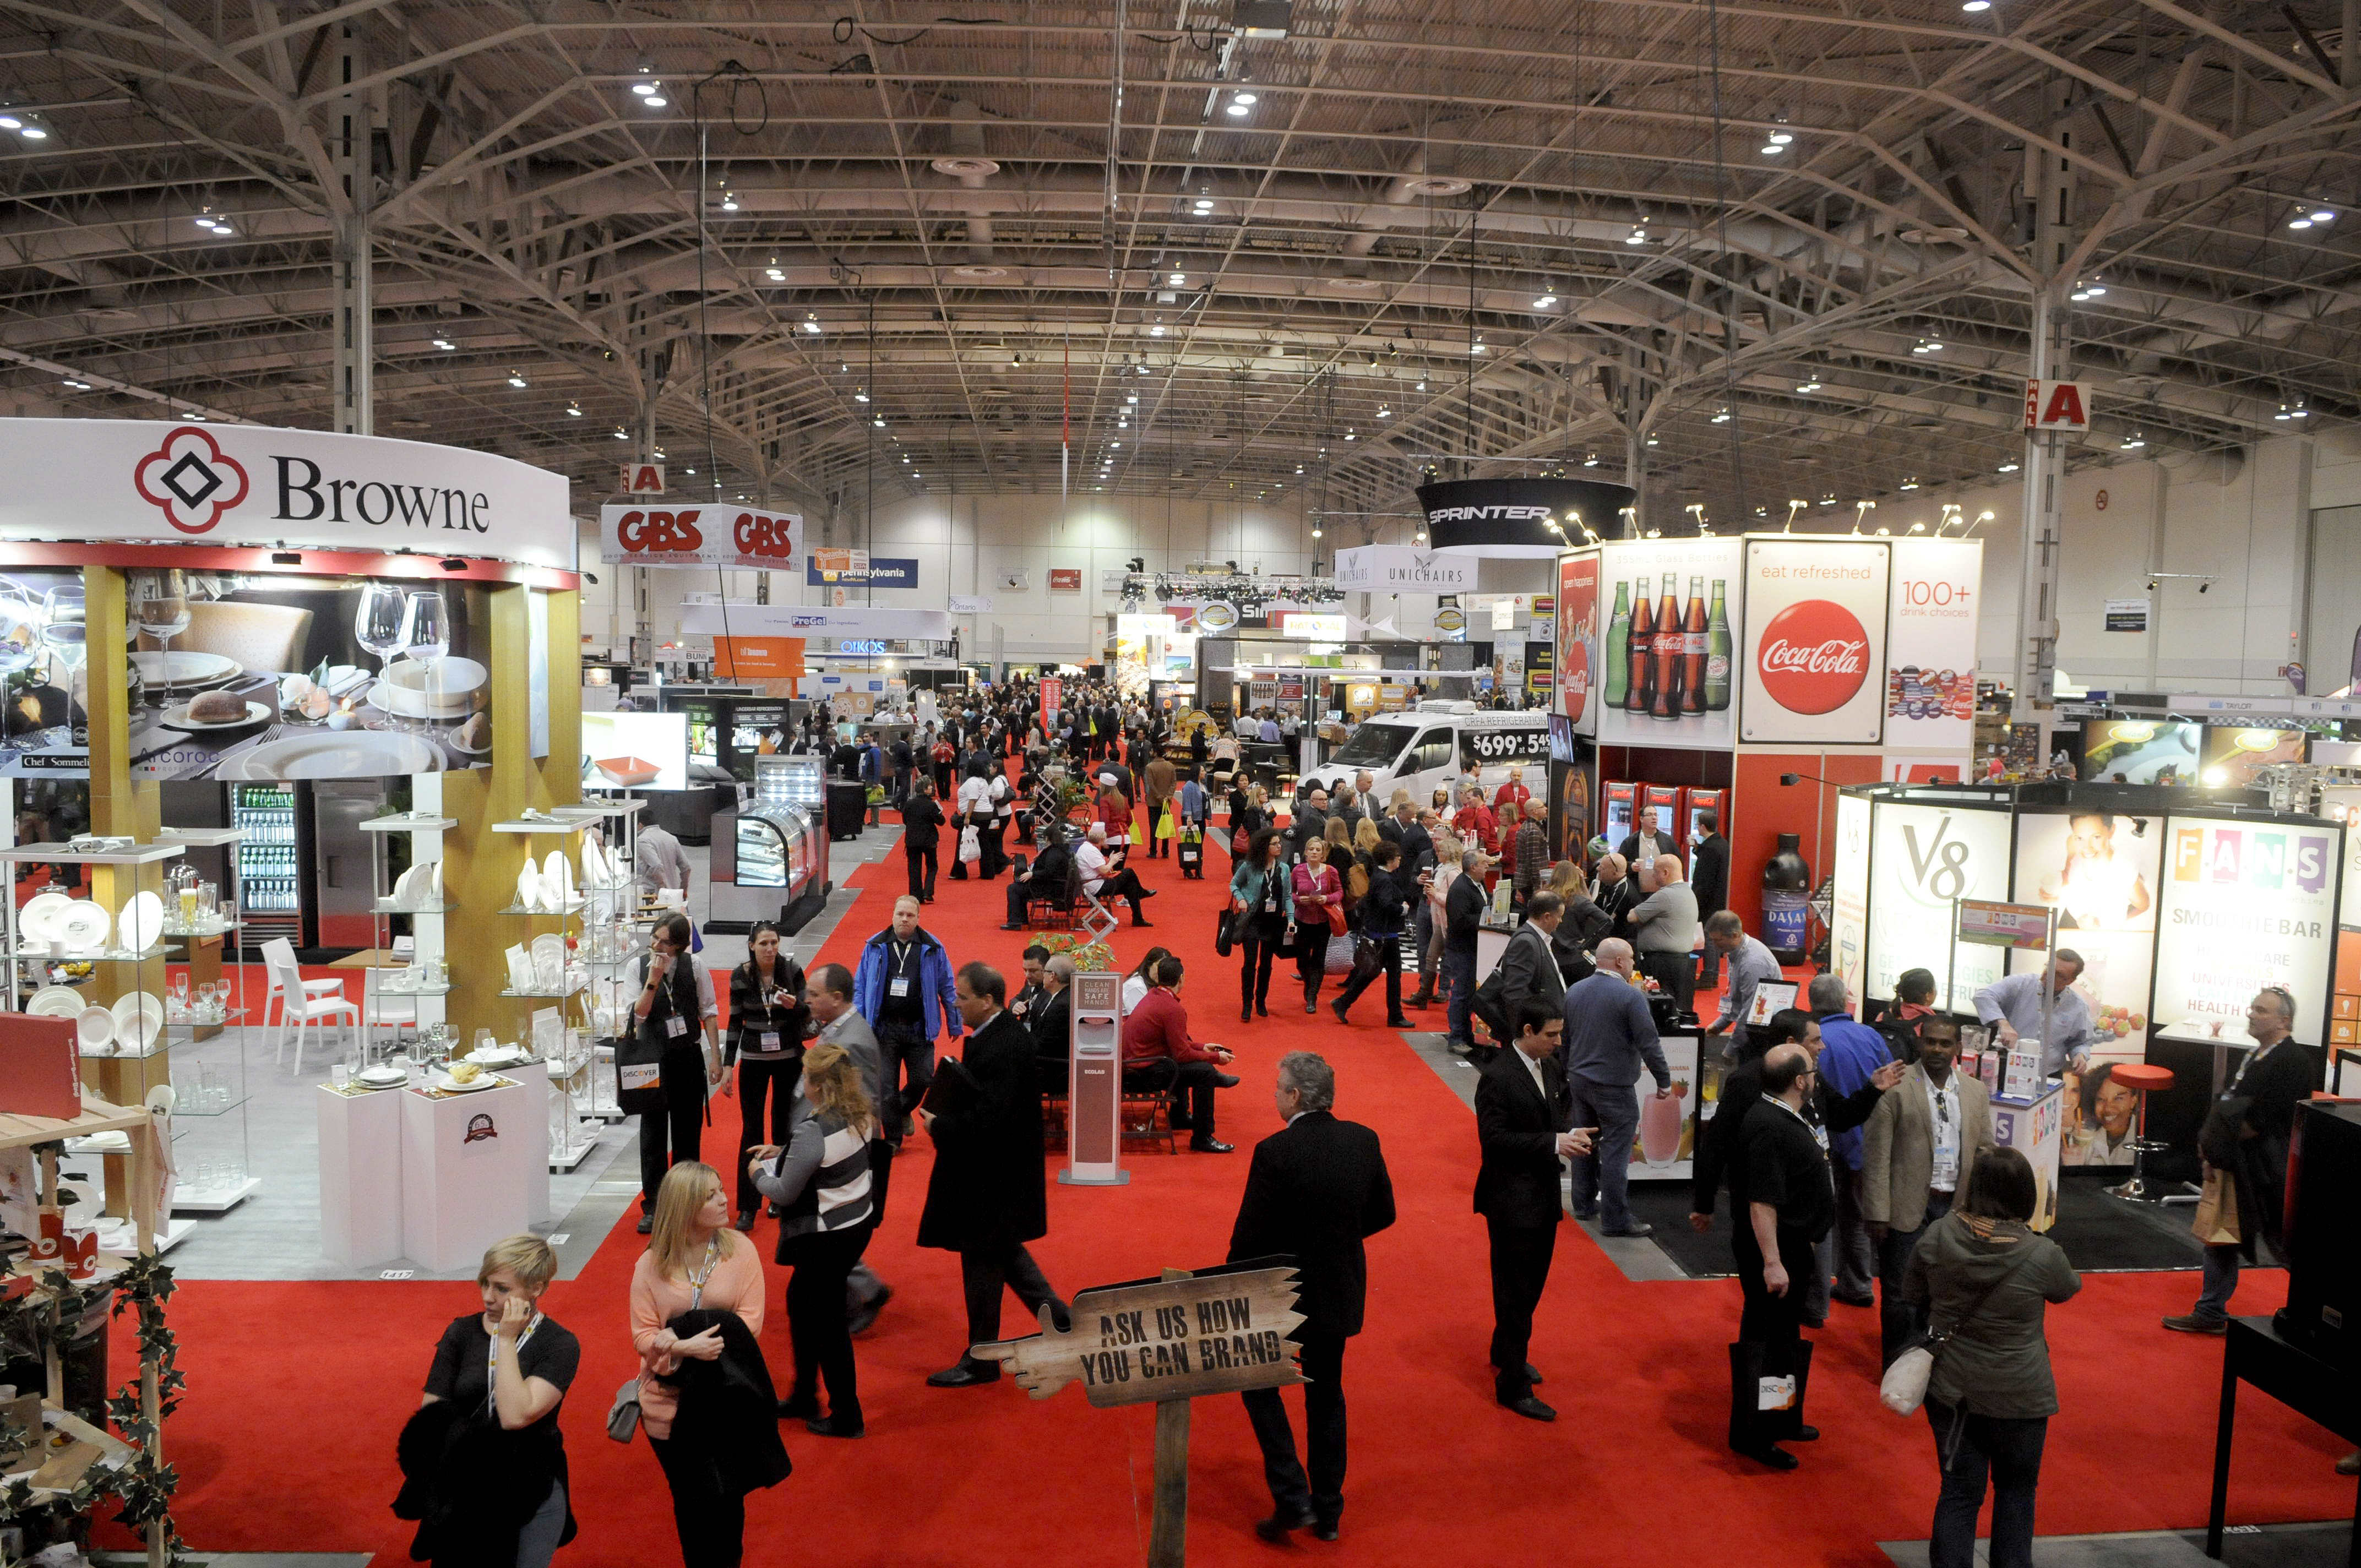 canadian travel trade shows